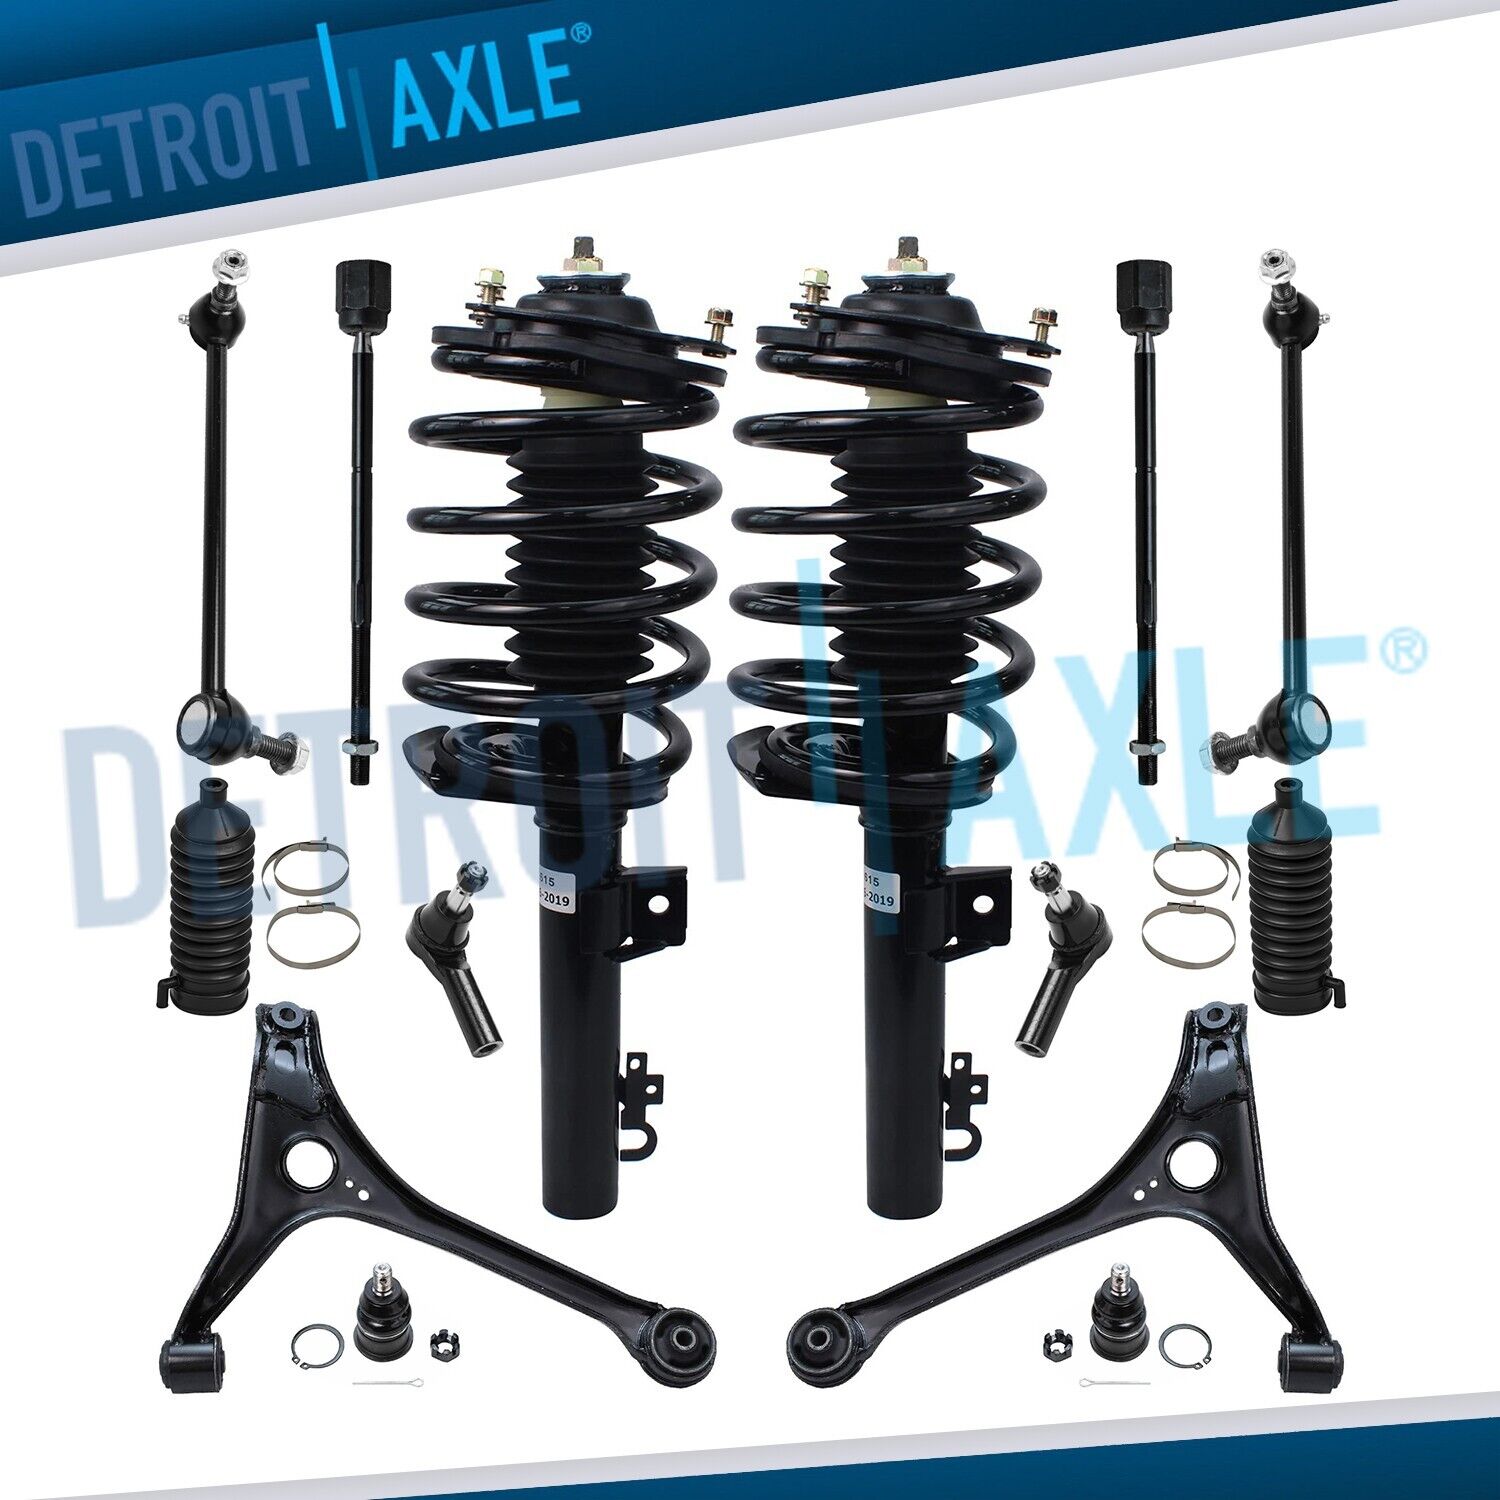 14pc Front Struts Lower Control Arms Kit for 1998-2007 Ford Taurus Mercury Sable